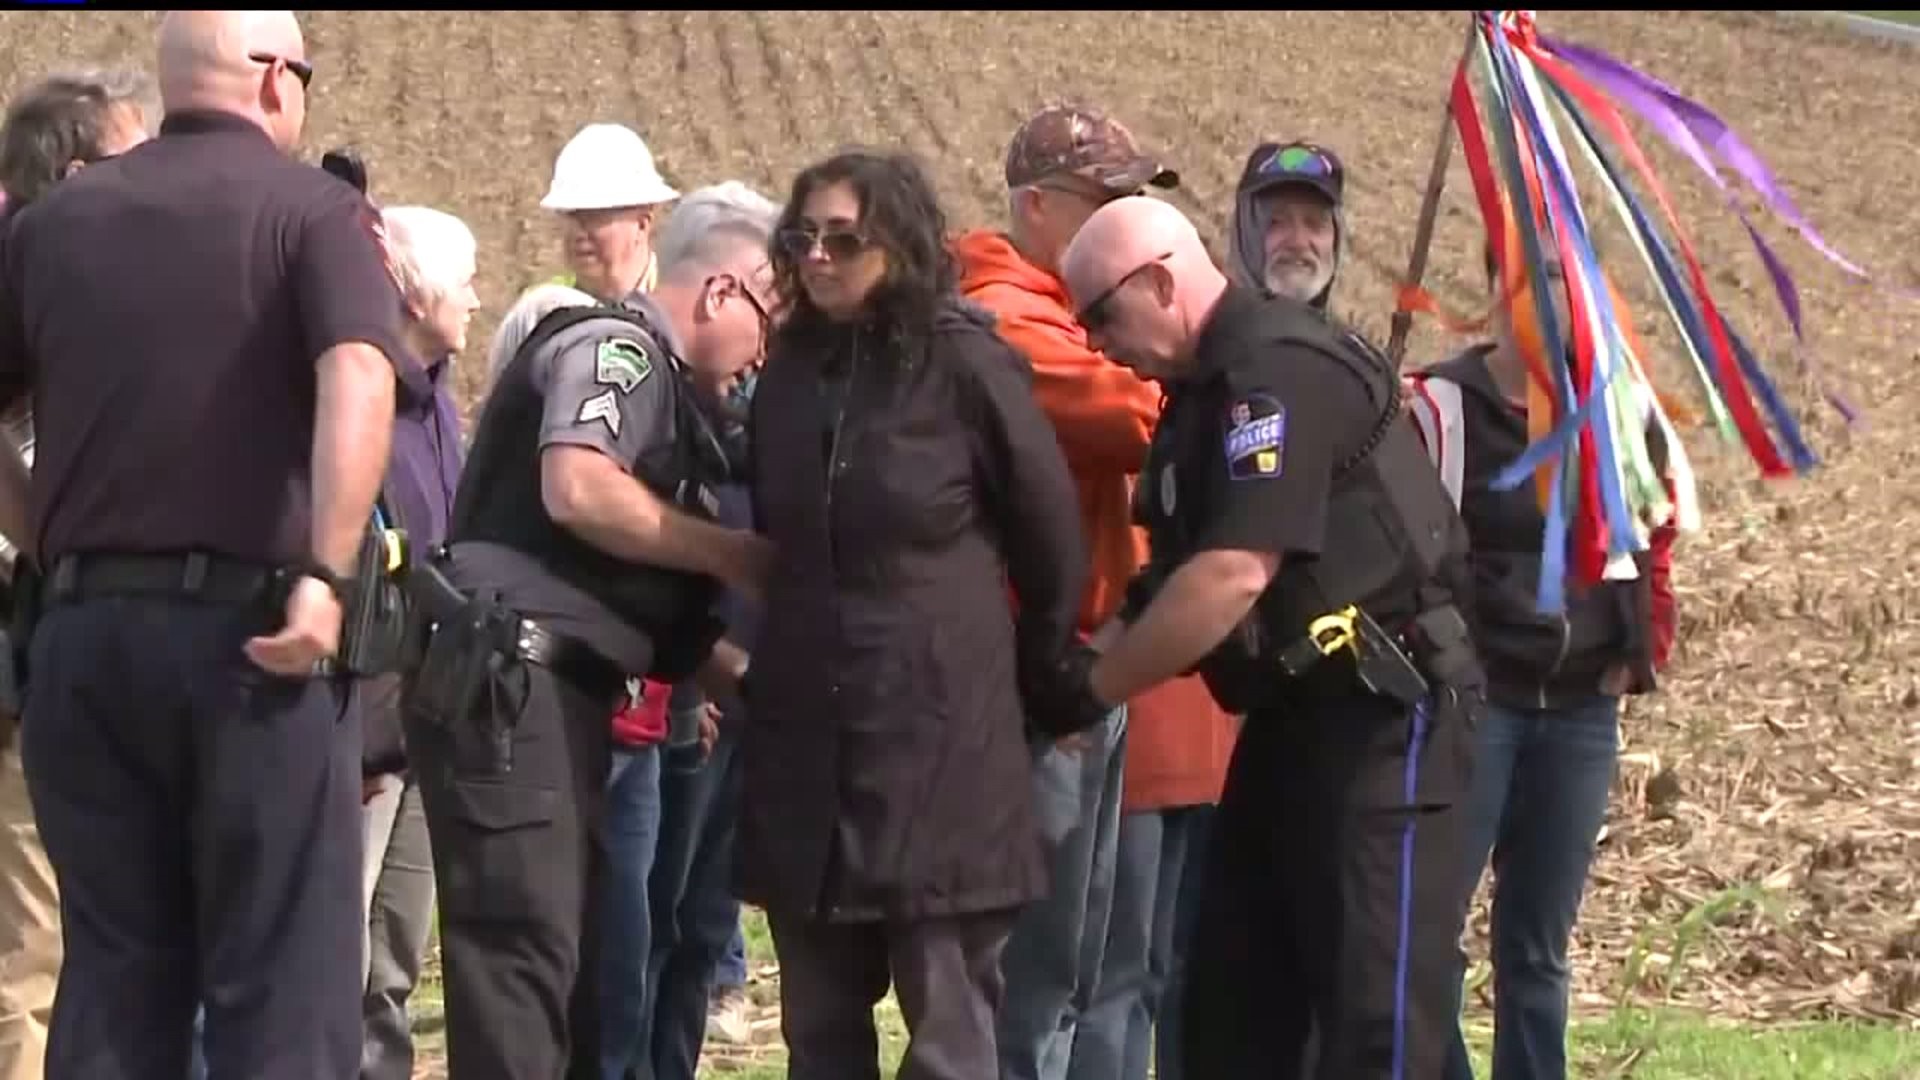 Pipeline protest leads to arrests